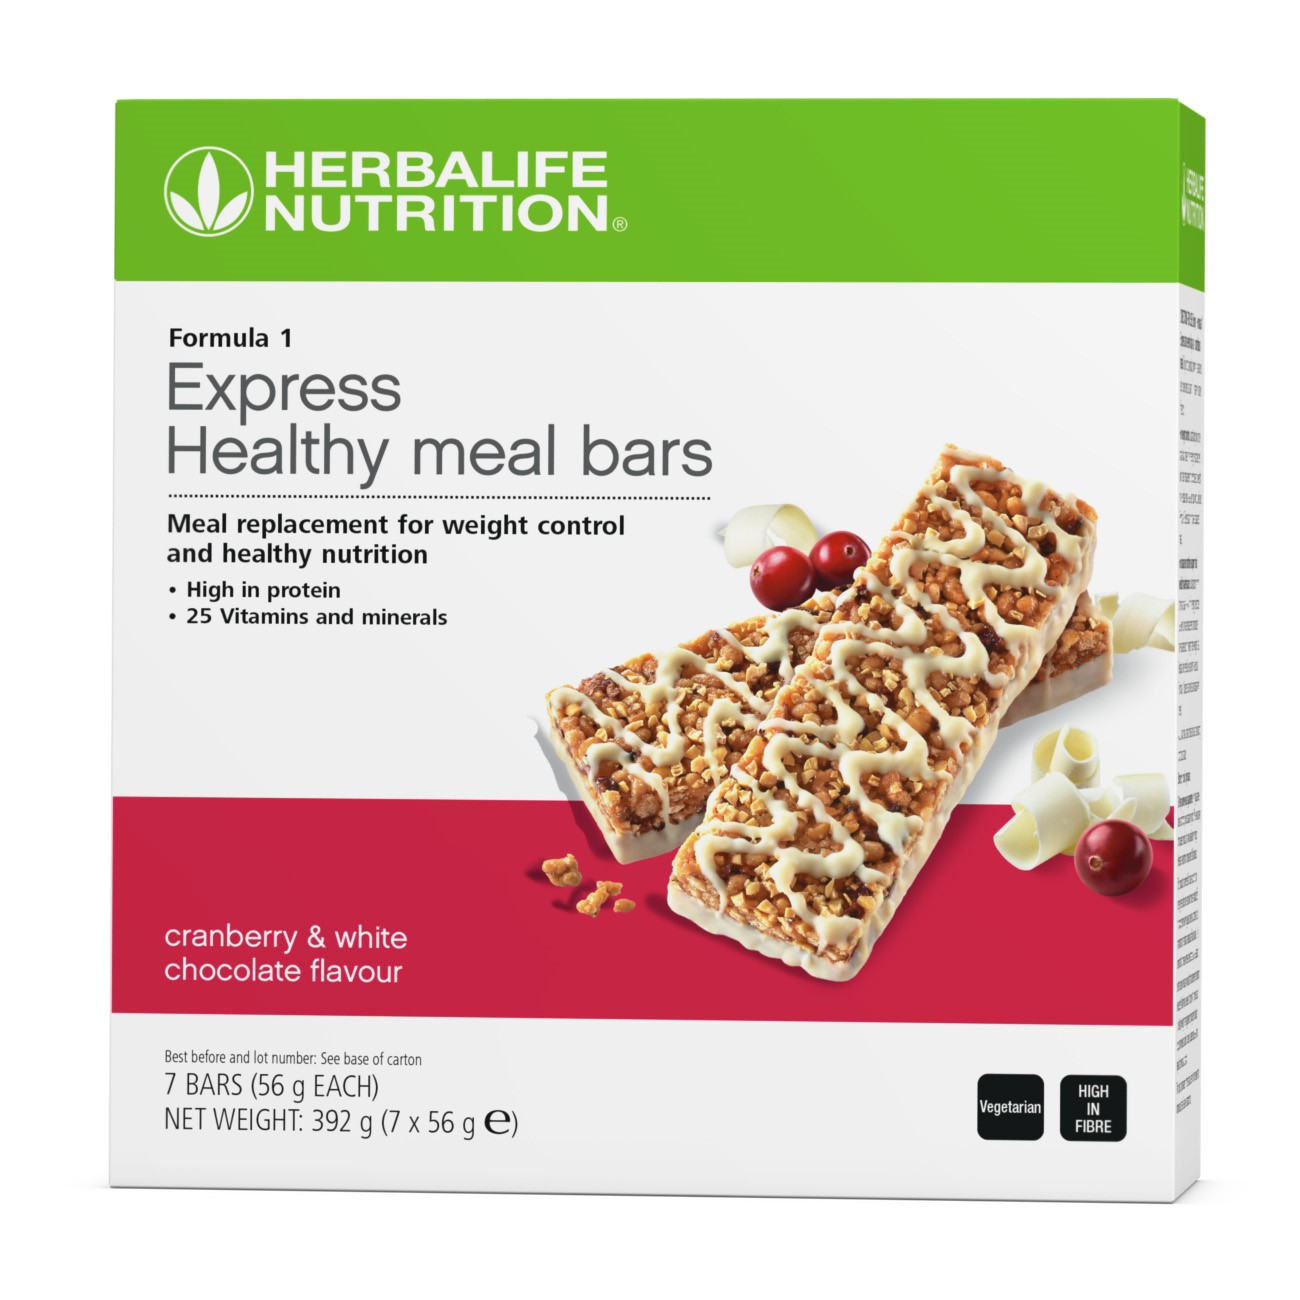 Formula 1 Express balanced meal bar in cranberry & white chocolate flavour is a delicious meal replacement, in a combination of crispies and cranberries, dipped in white chocolate.